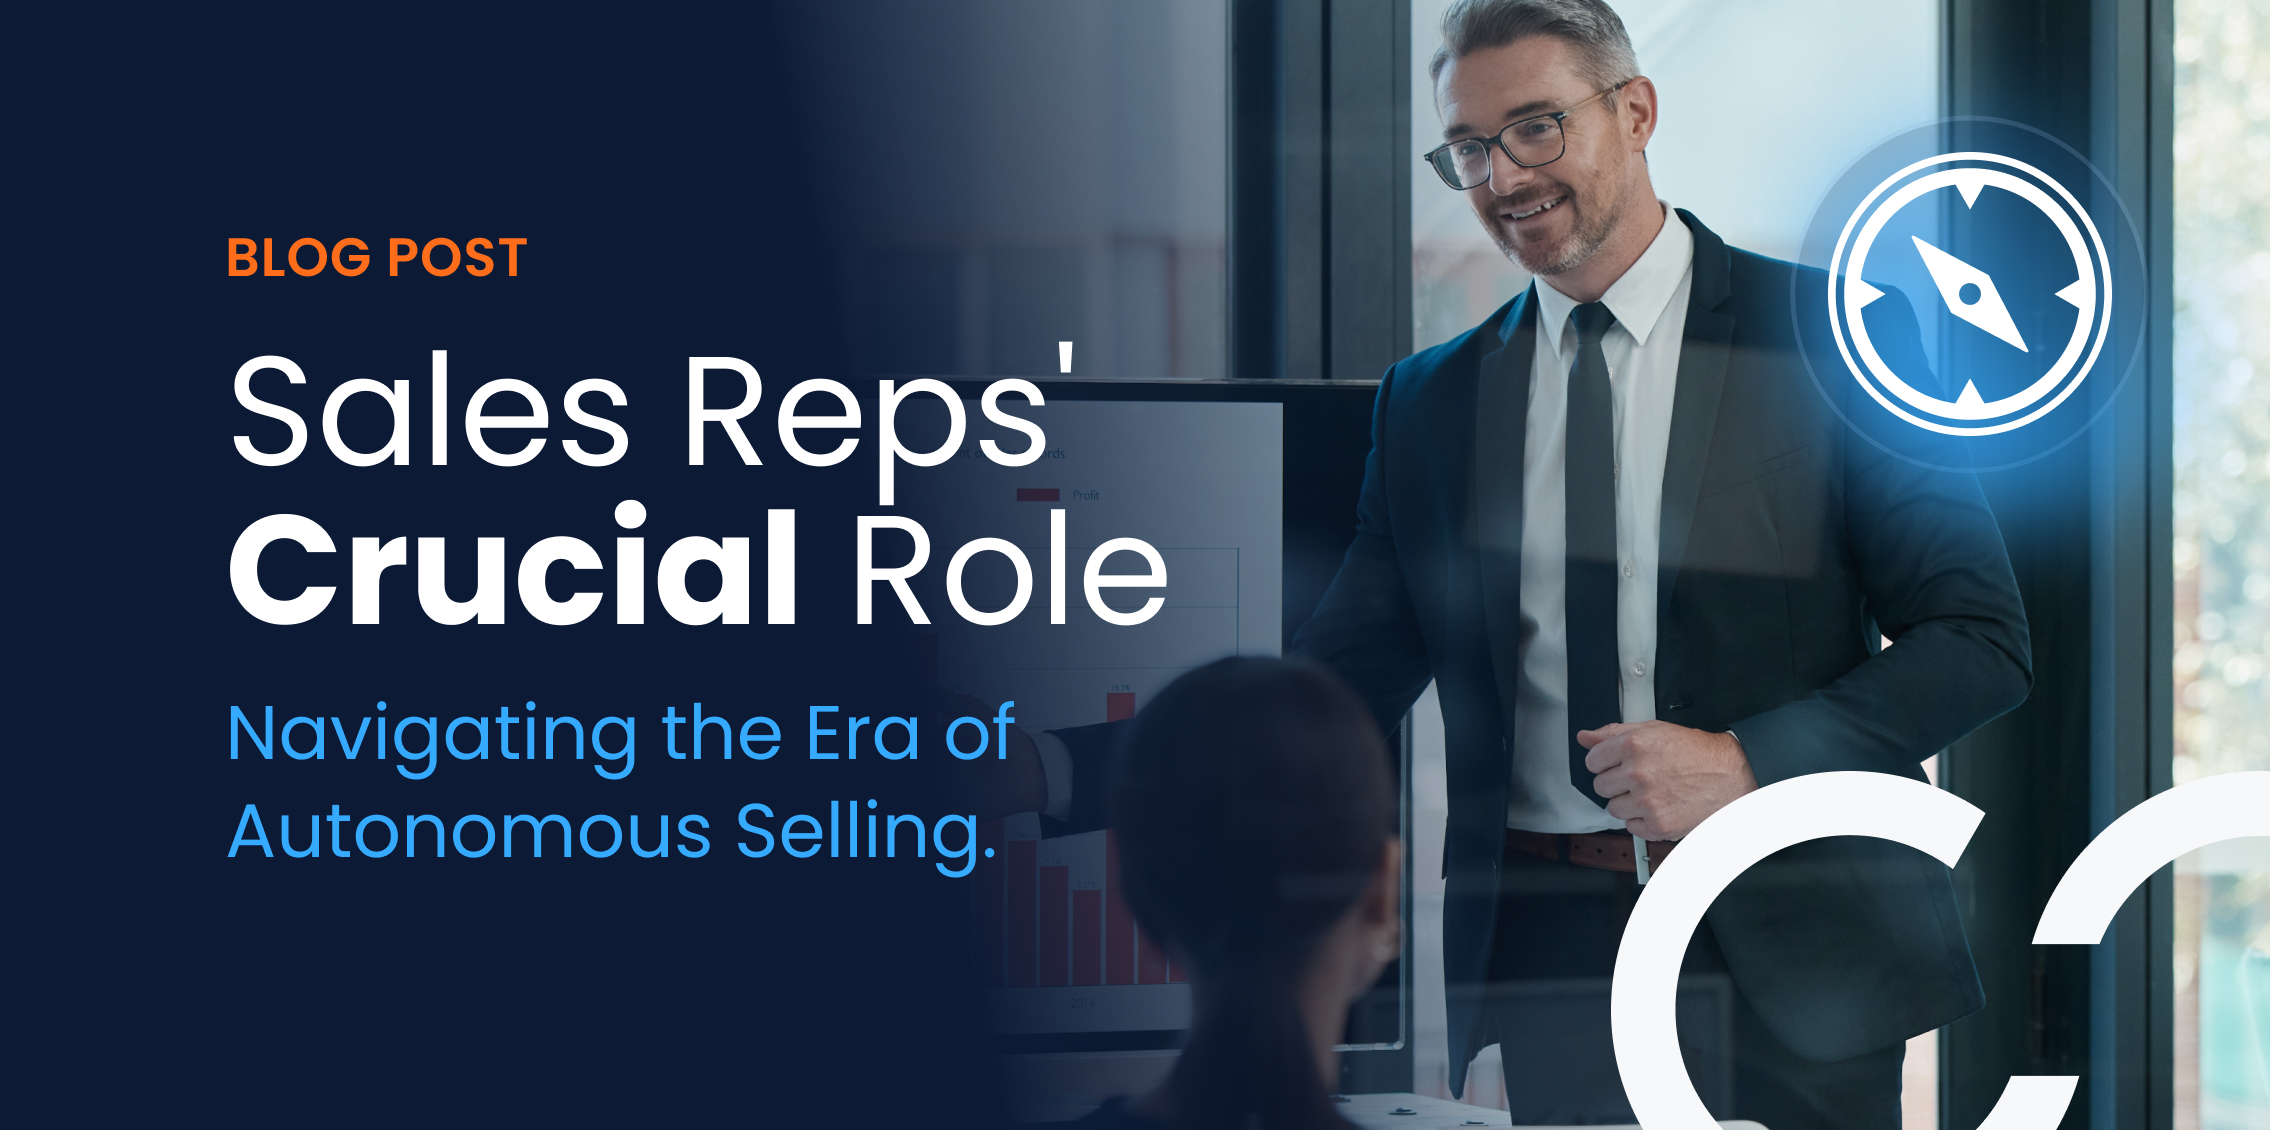 consultative sales reps thriving in an age of autonomous selling with a consultative sales approach to solution selling